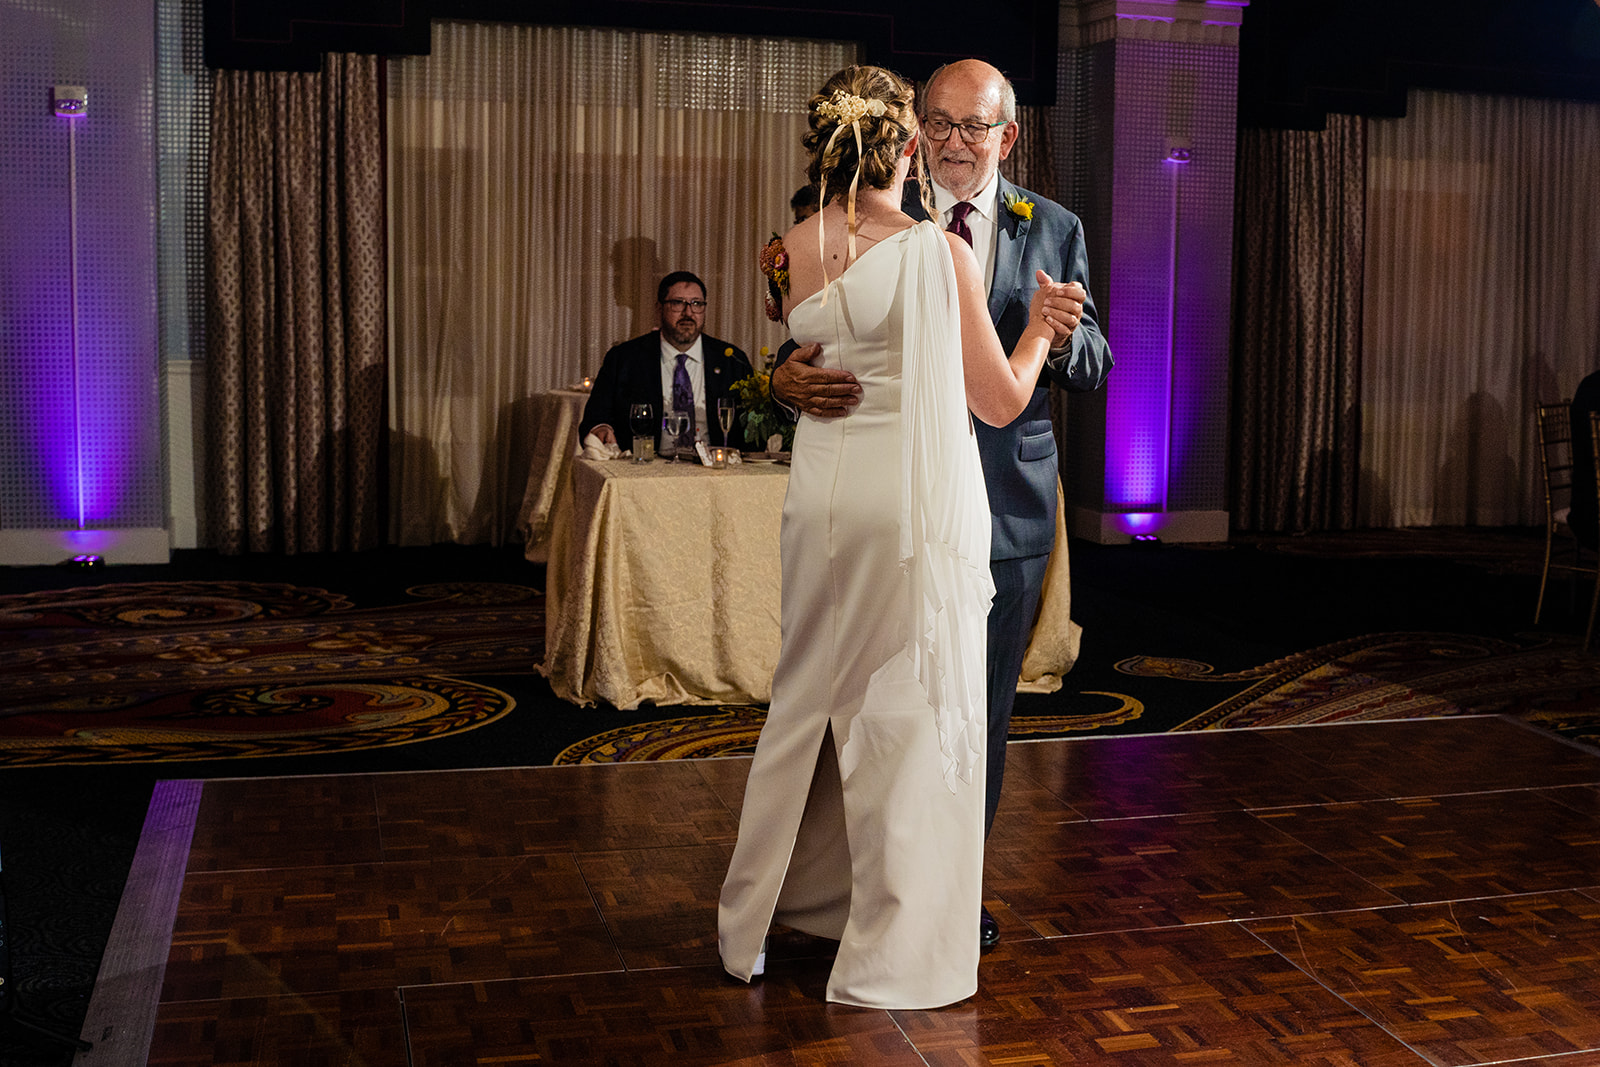 Father-daughter dance at the wedding reception at Hotel Monaco in Washington DC by Potok's World Photography